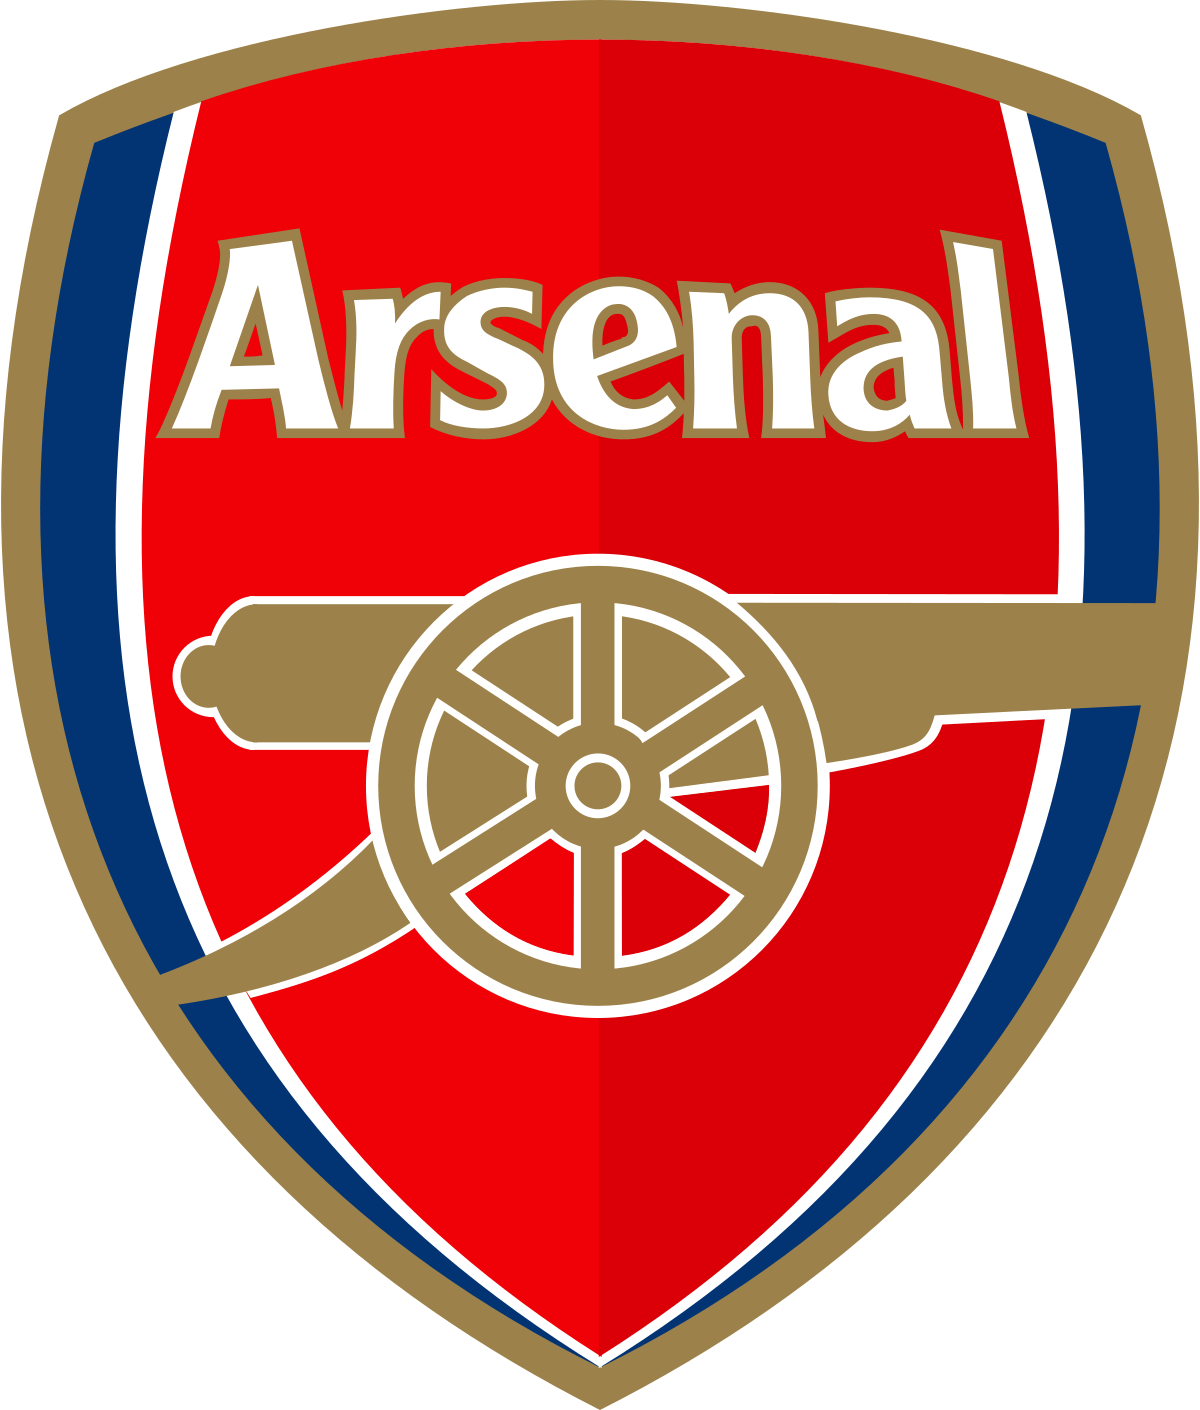 Square in a Red F Logo - Arsenal F.C